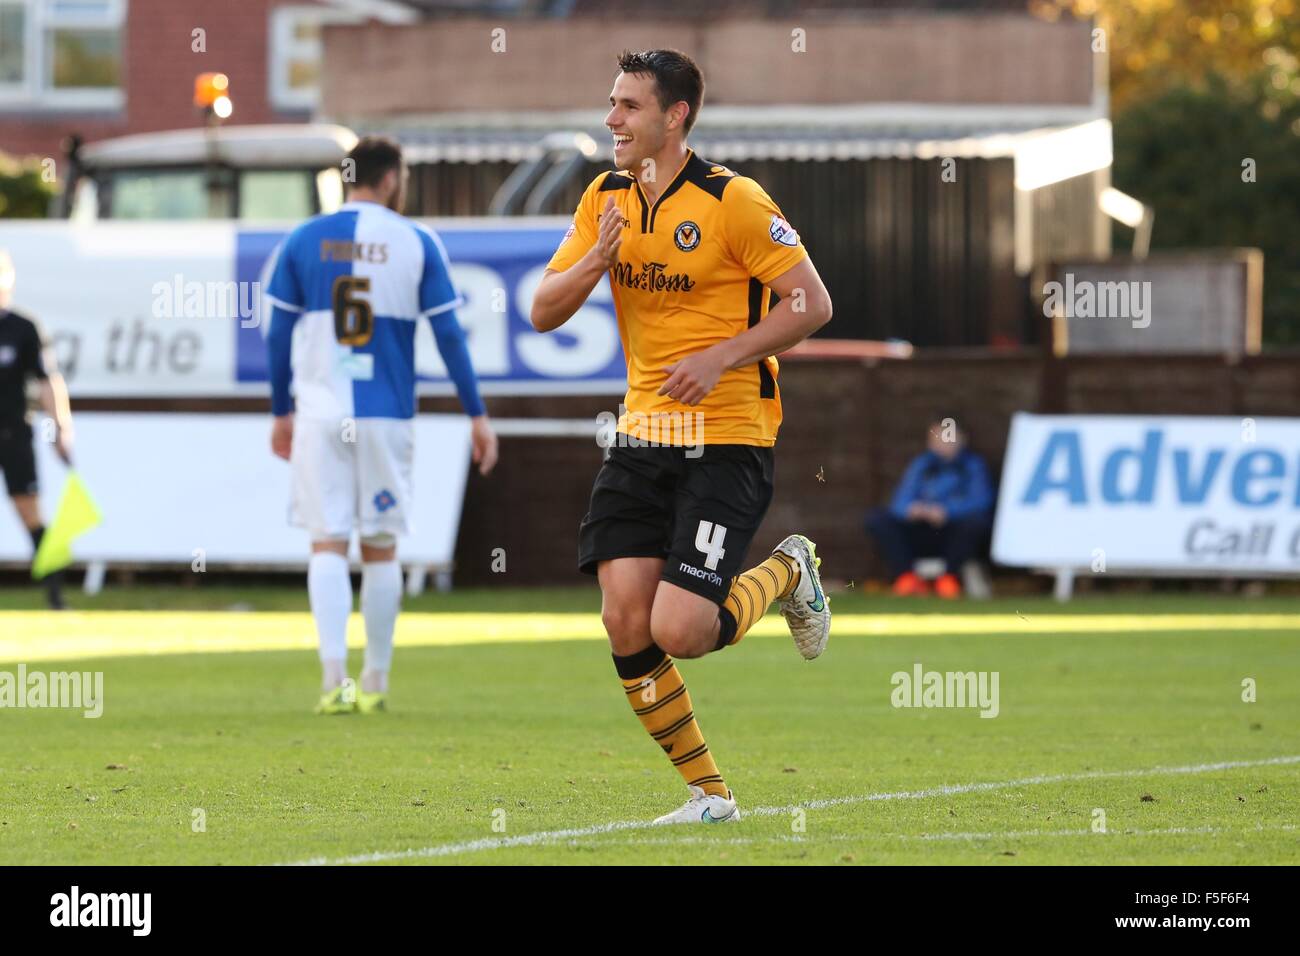 BRISTOL, ENGLAND. 24 October 2015. Tommy O'Sullivan scores for Newport County AFC against Bristol Rovers in the Football League. Stock Photo